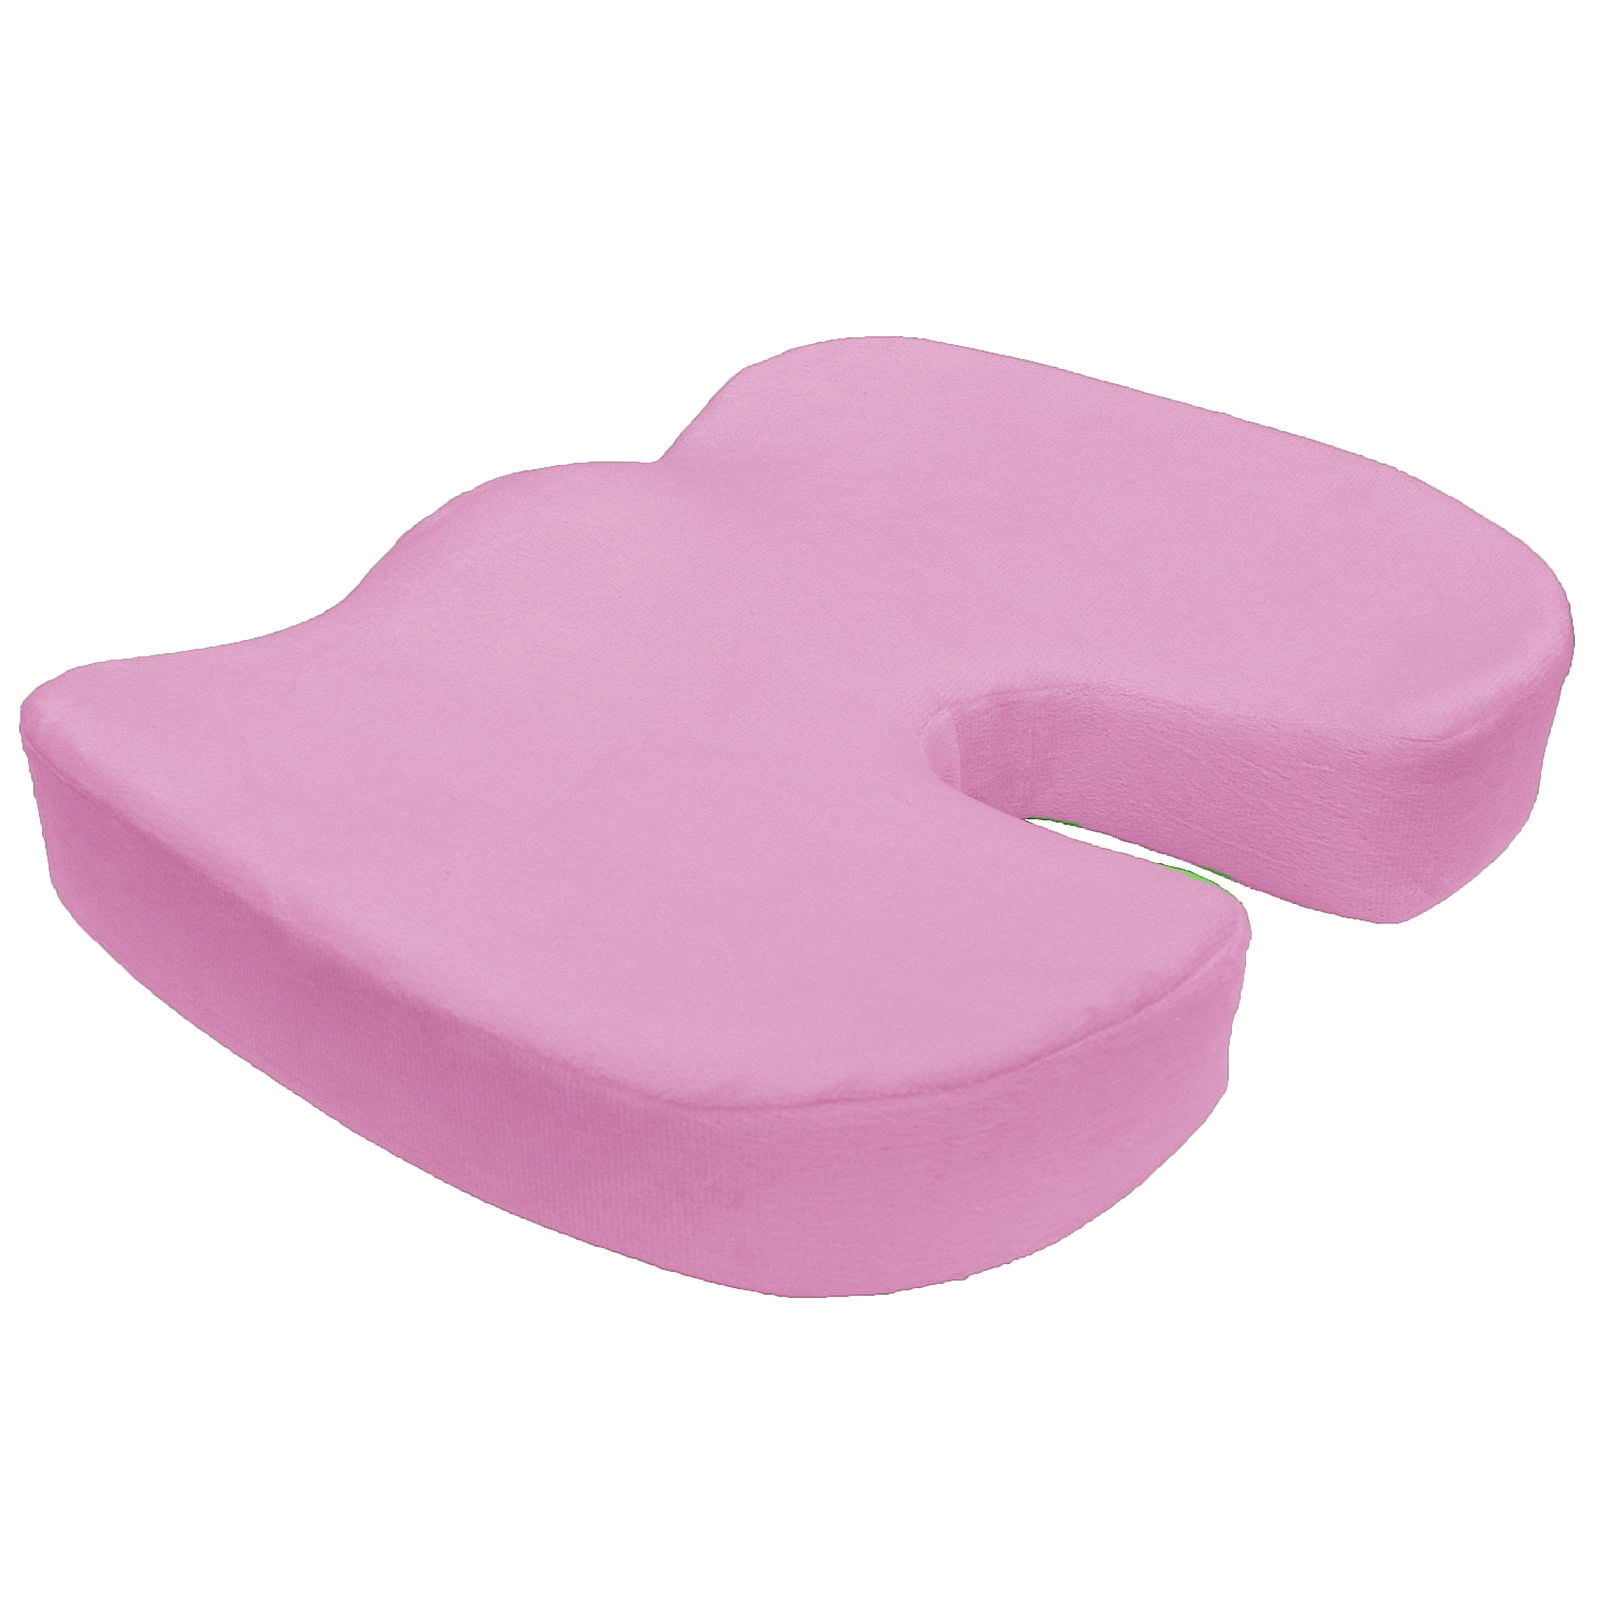 Bookishbunny Memory Foam Coccyx Seat Cushion Support Pillow Sciatica & Pain Relief Car Office Chair, Size: 17.7, Pink